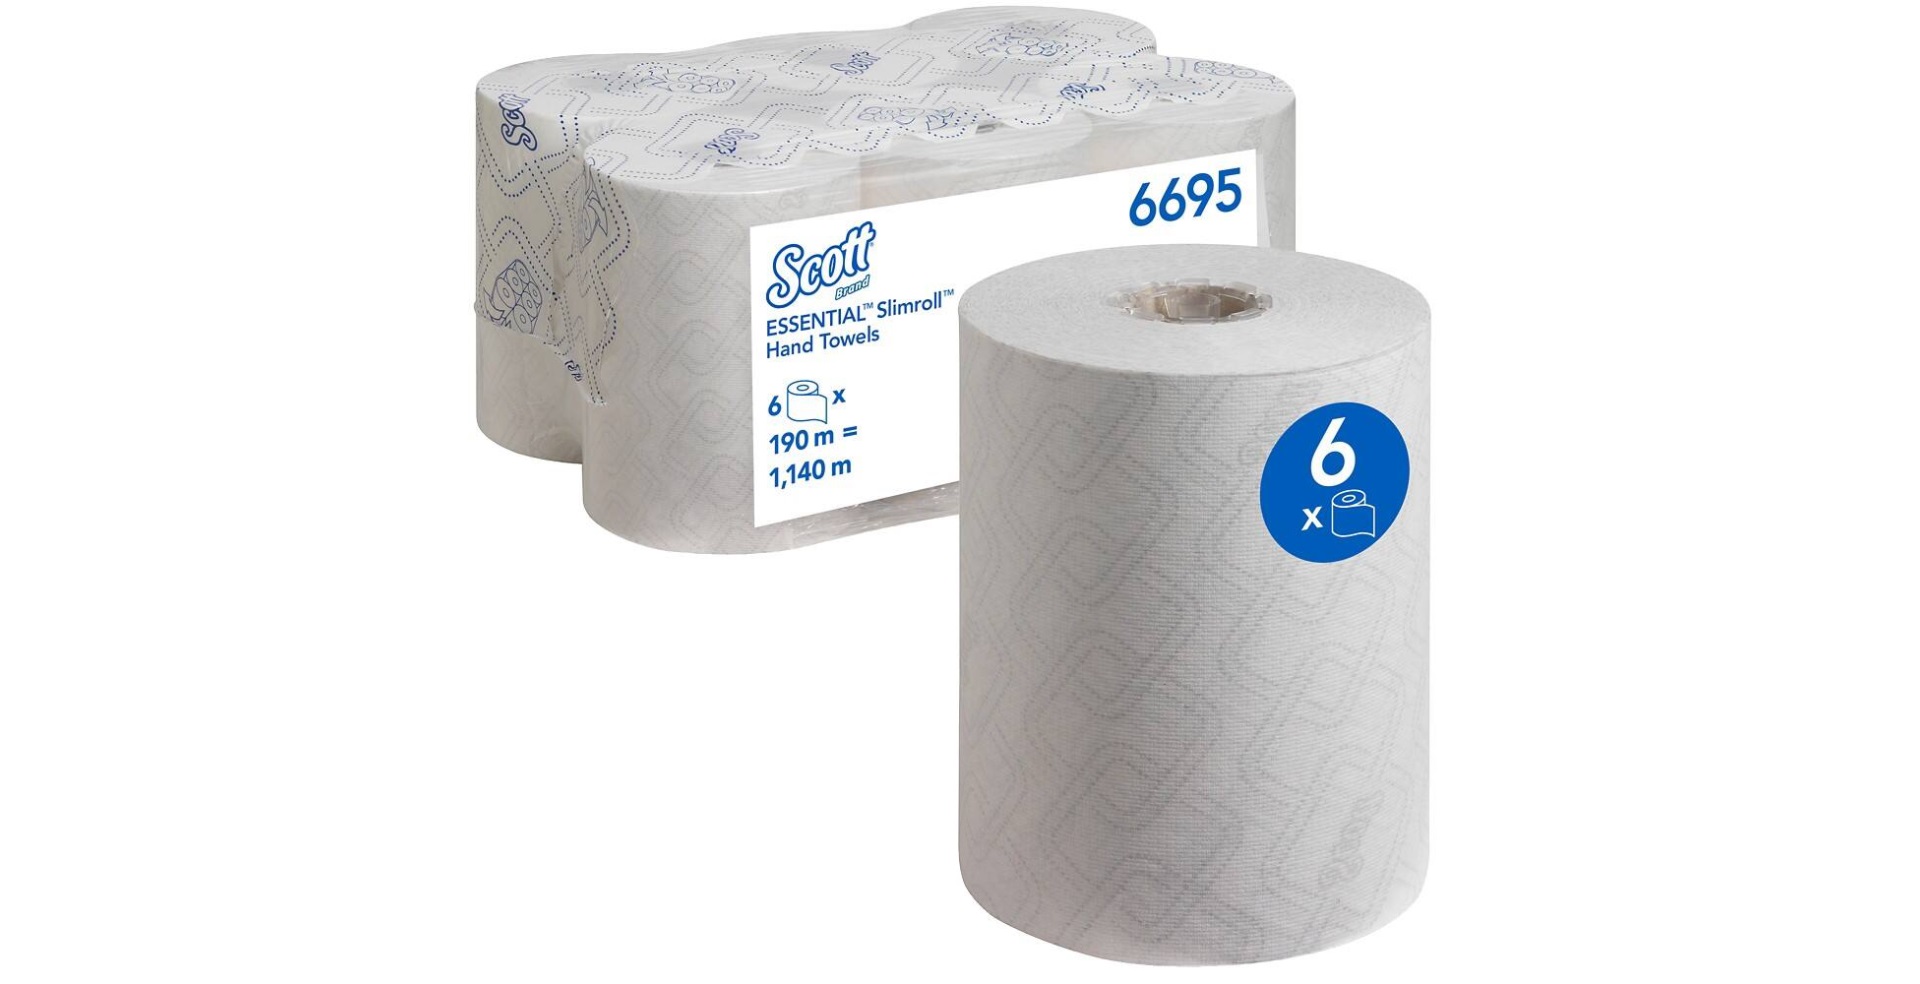 Scott Essential Slimroll Rolled Hand Towels 6695 190M - White - Case of 6 Rolls